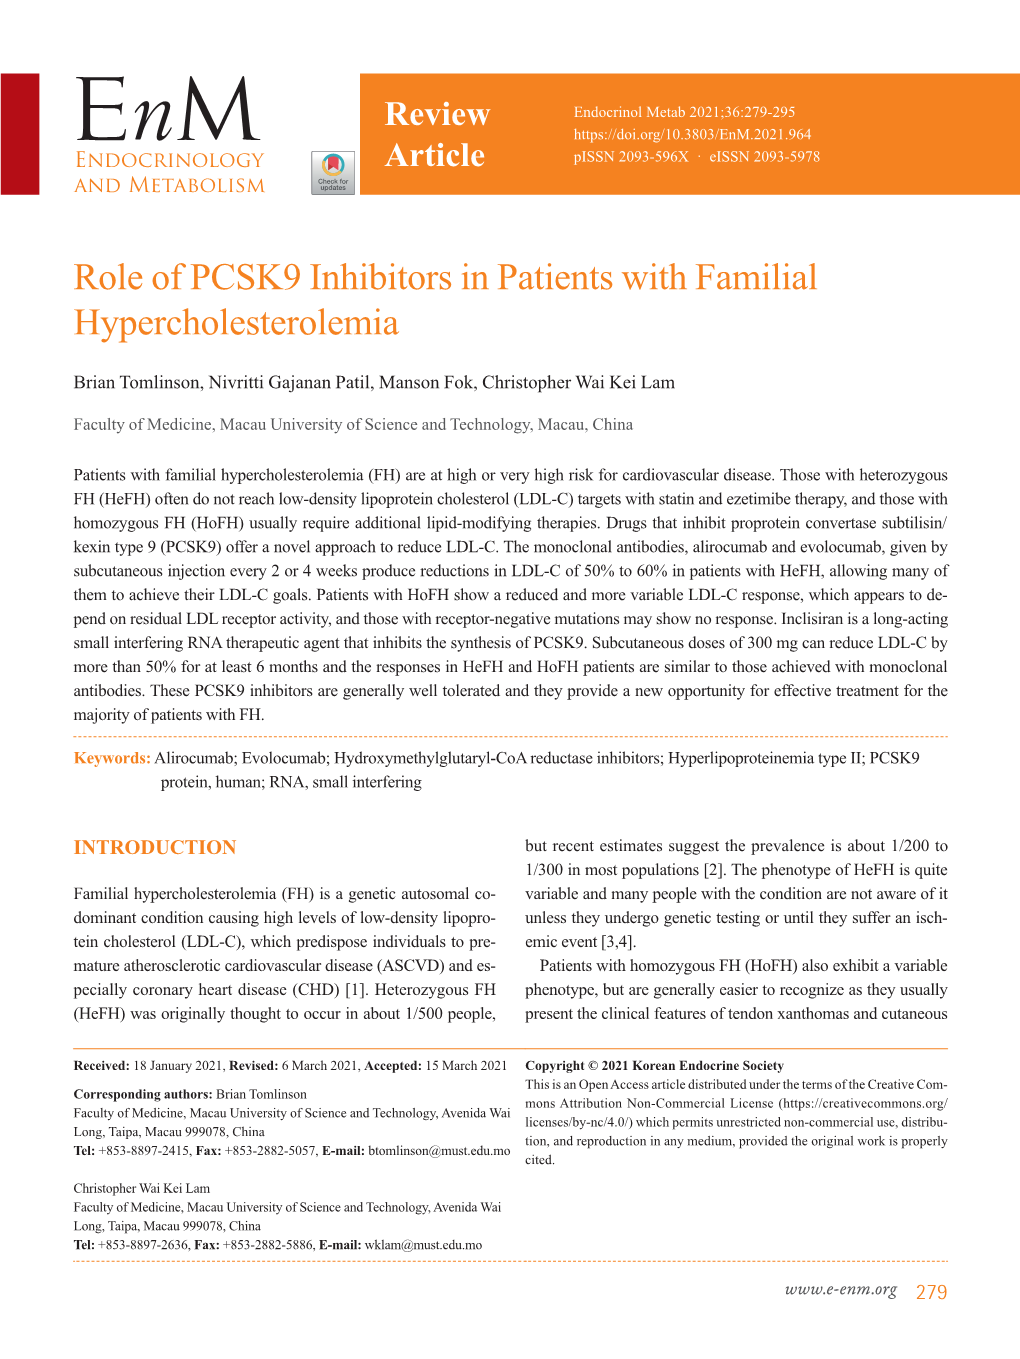 Role of PCSK9 Inhibitors in Patients with Familial Hypercholesterolemia